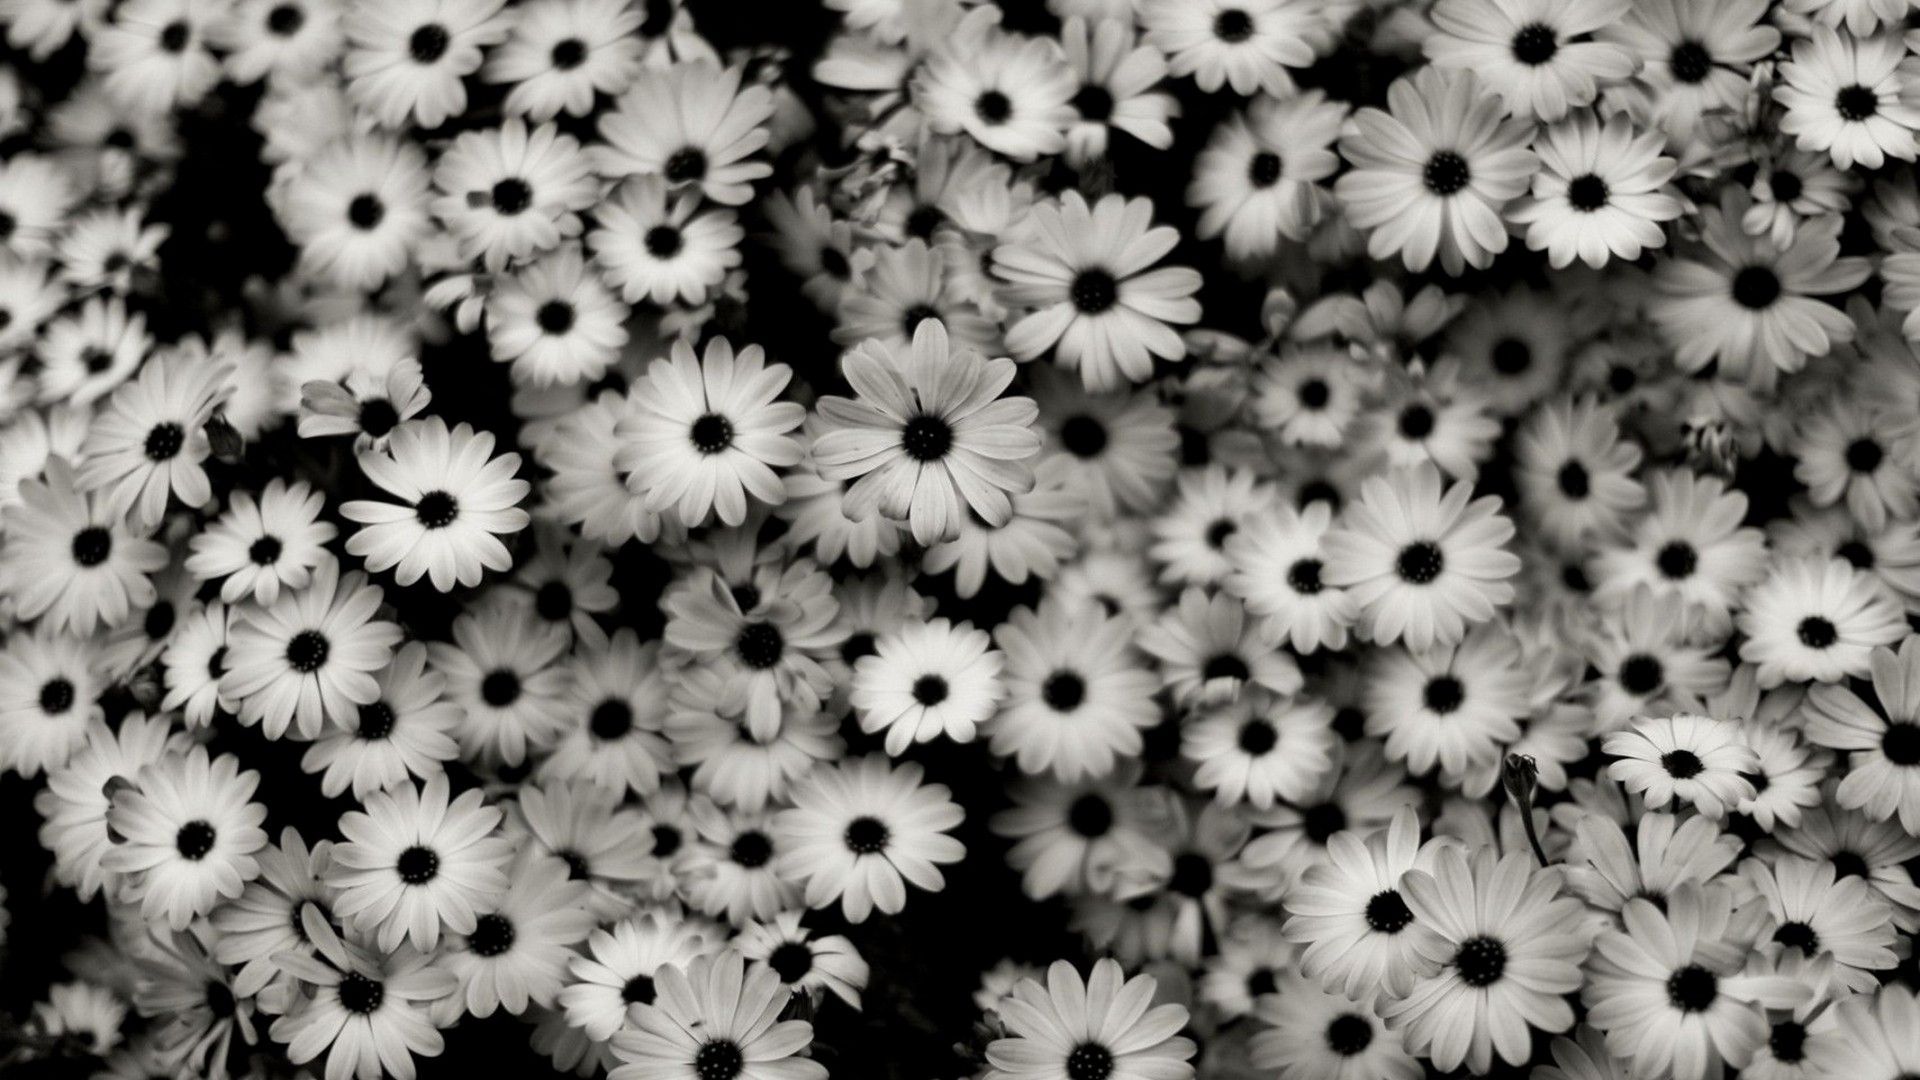 Black and white flowers wallpaper for your computer desktop - Black and white, white, photography